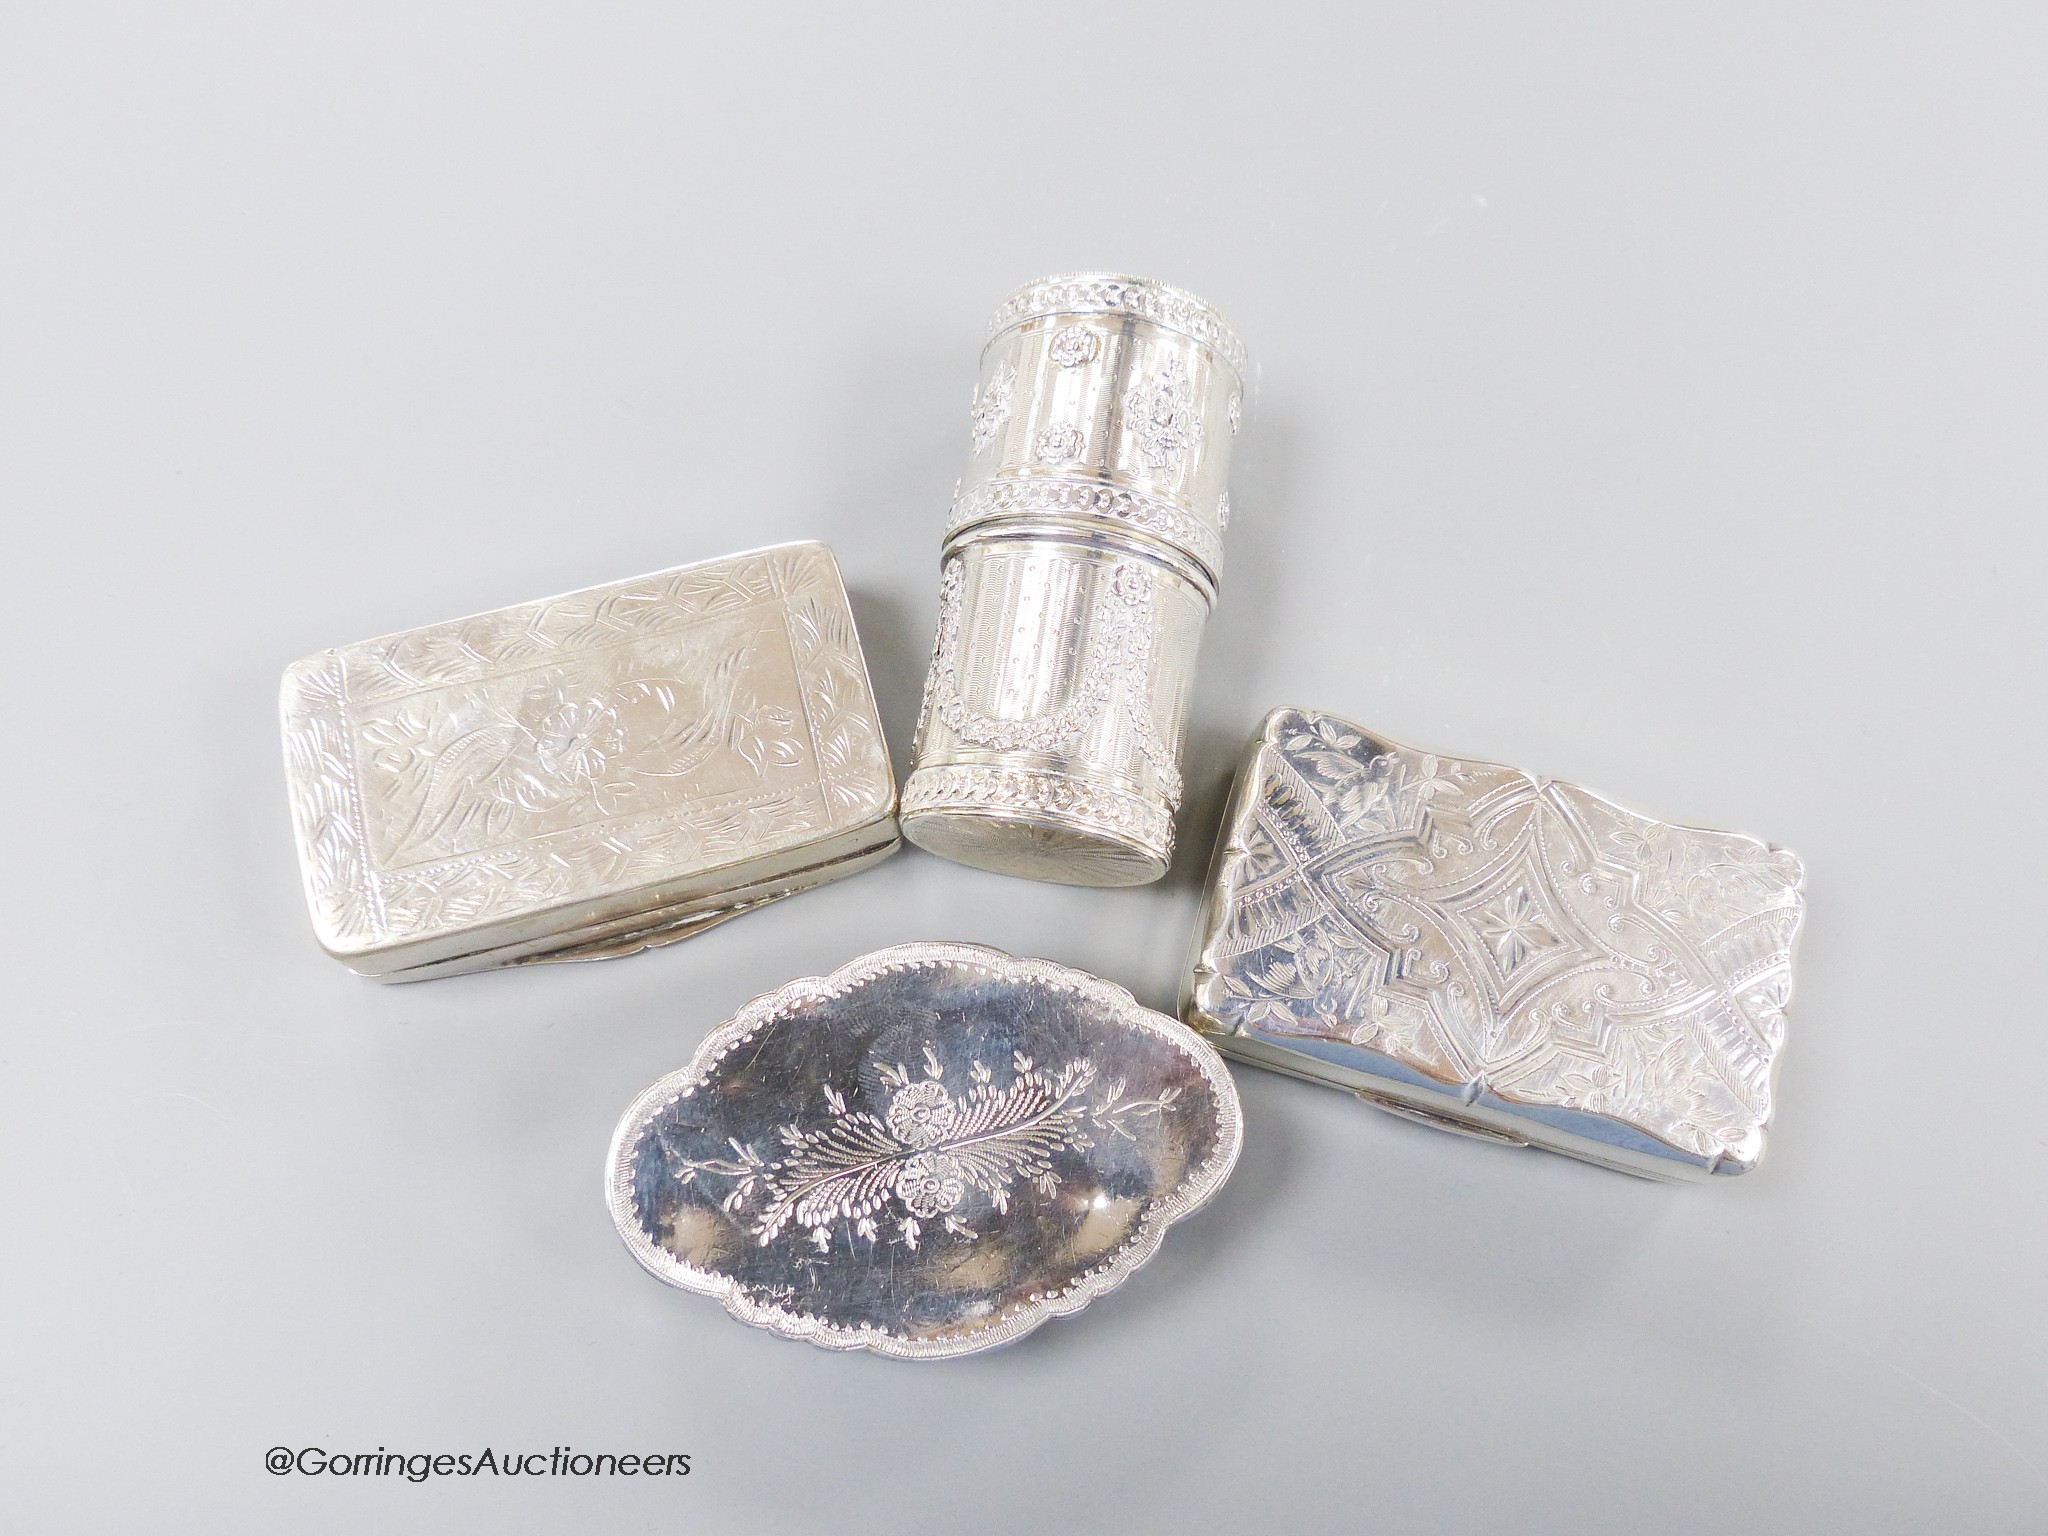 An early 20th century French white metal cylindrical box and cover, 72mm and three other continental white metal snuff boxes, including one embossed with an angel, 7.5oz.